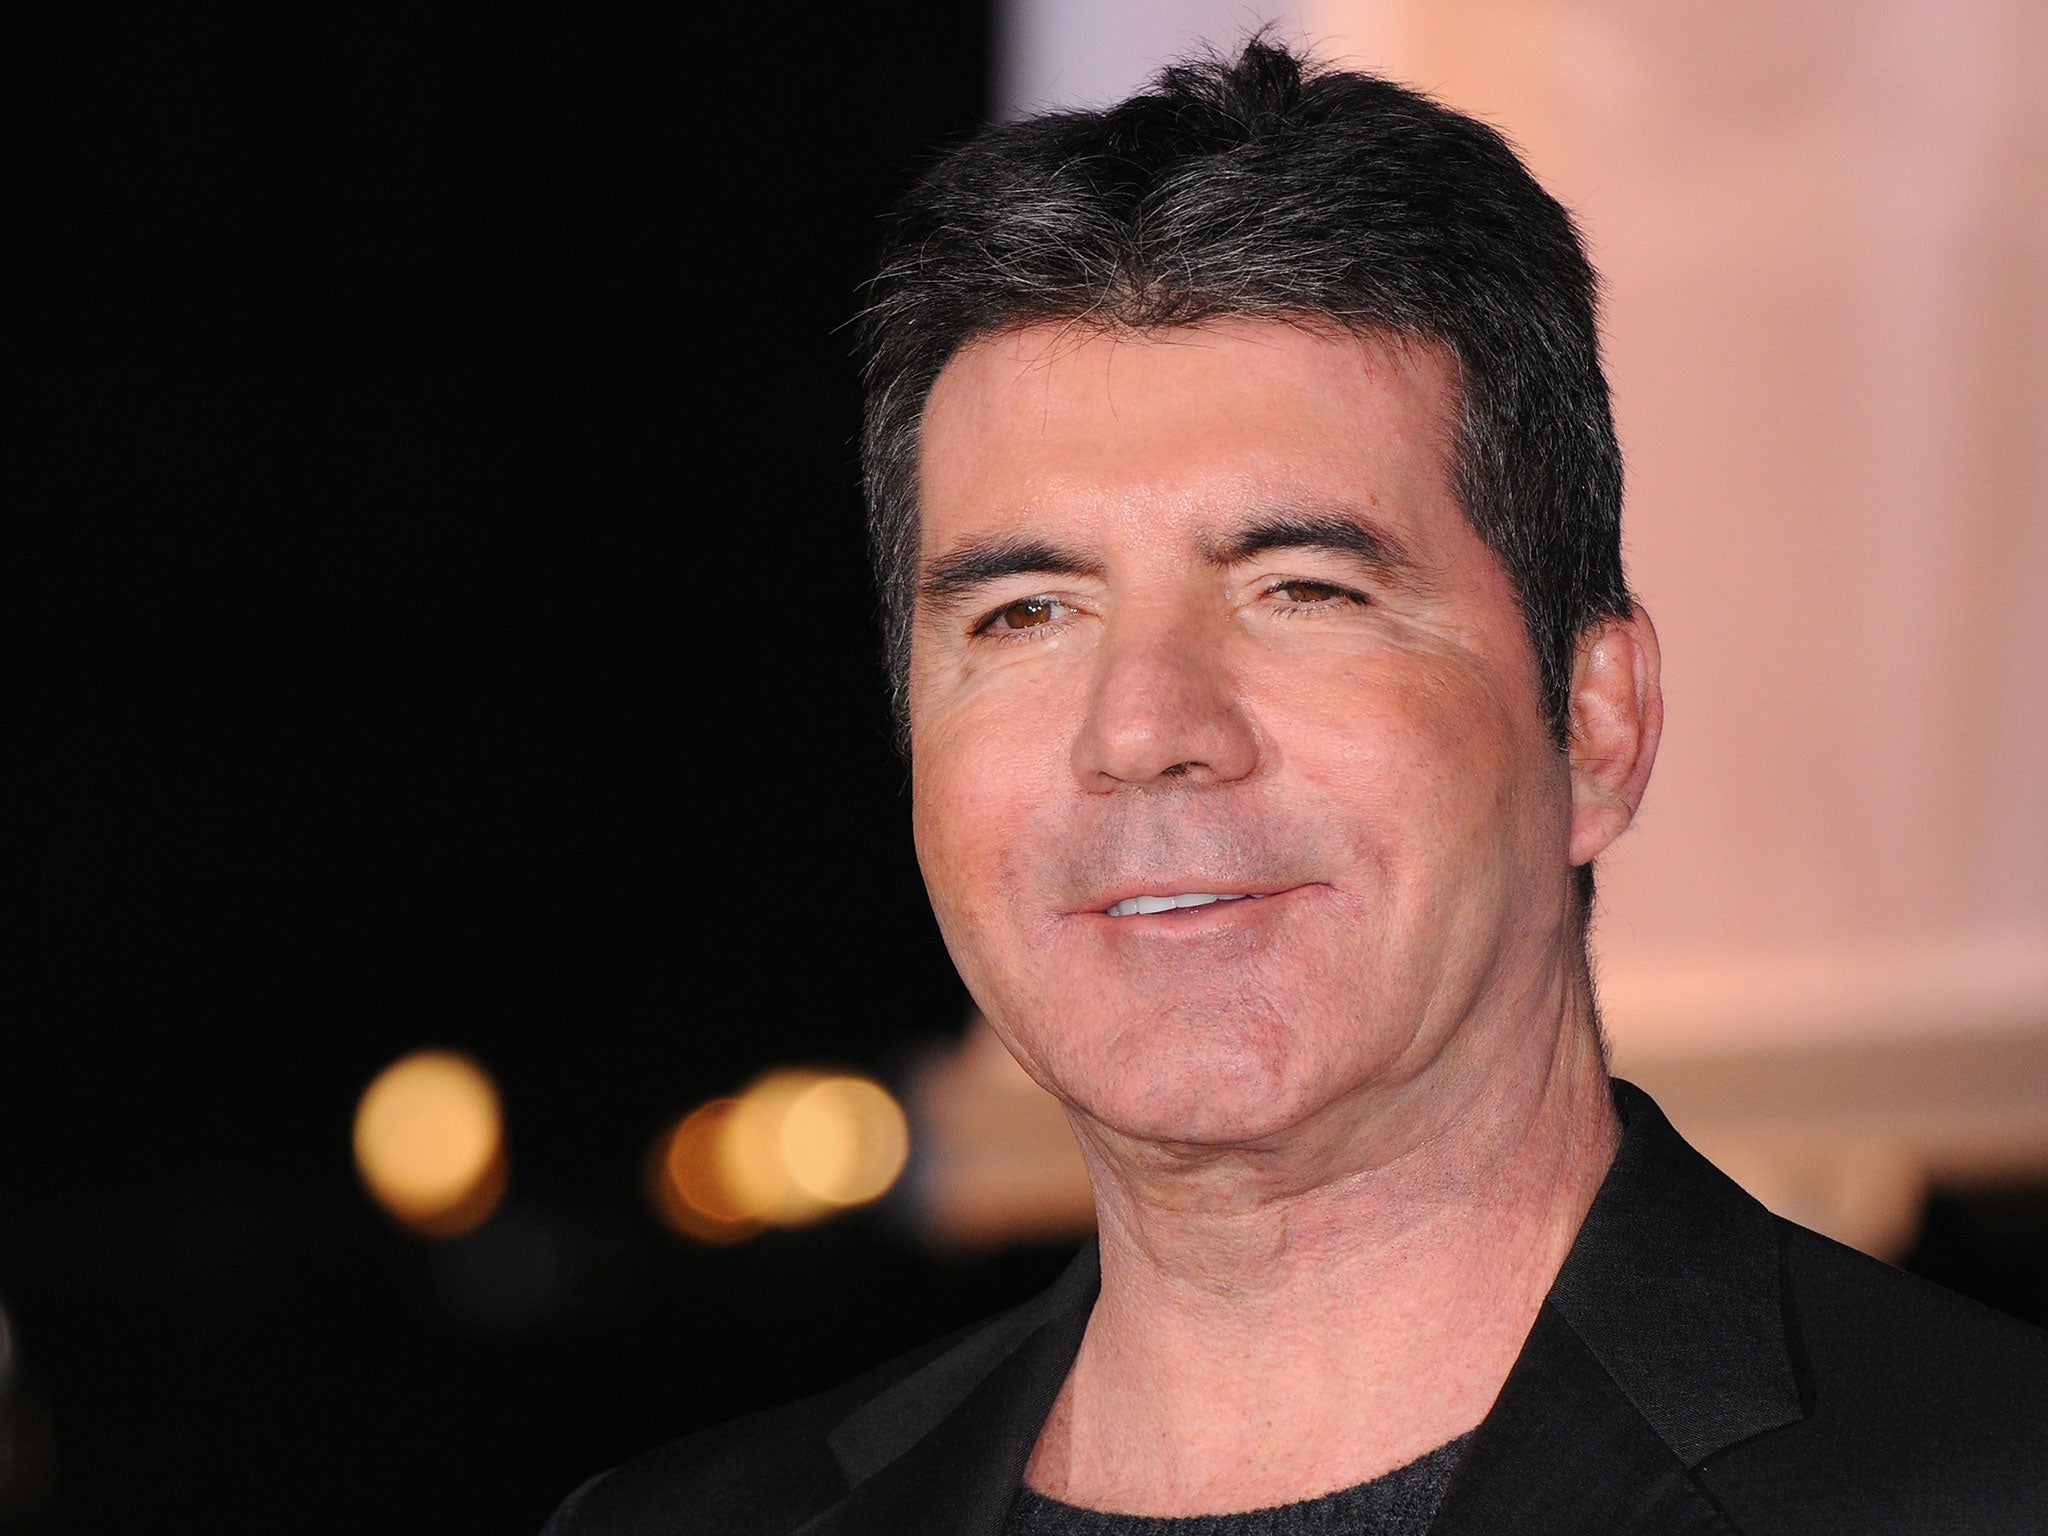 Simon Cowell was hypnotised by a dog at the Britain's Got Talent auditions in Manchester